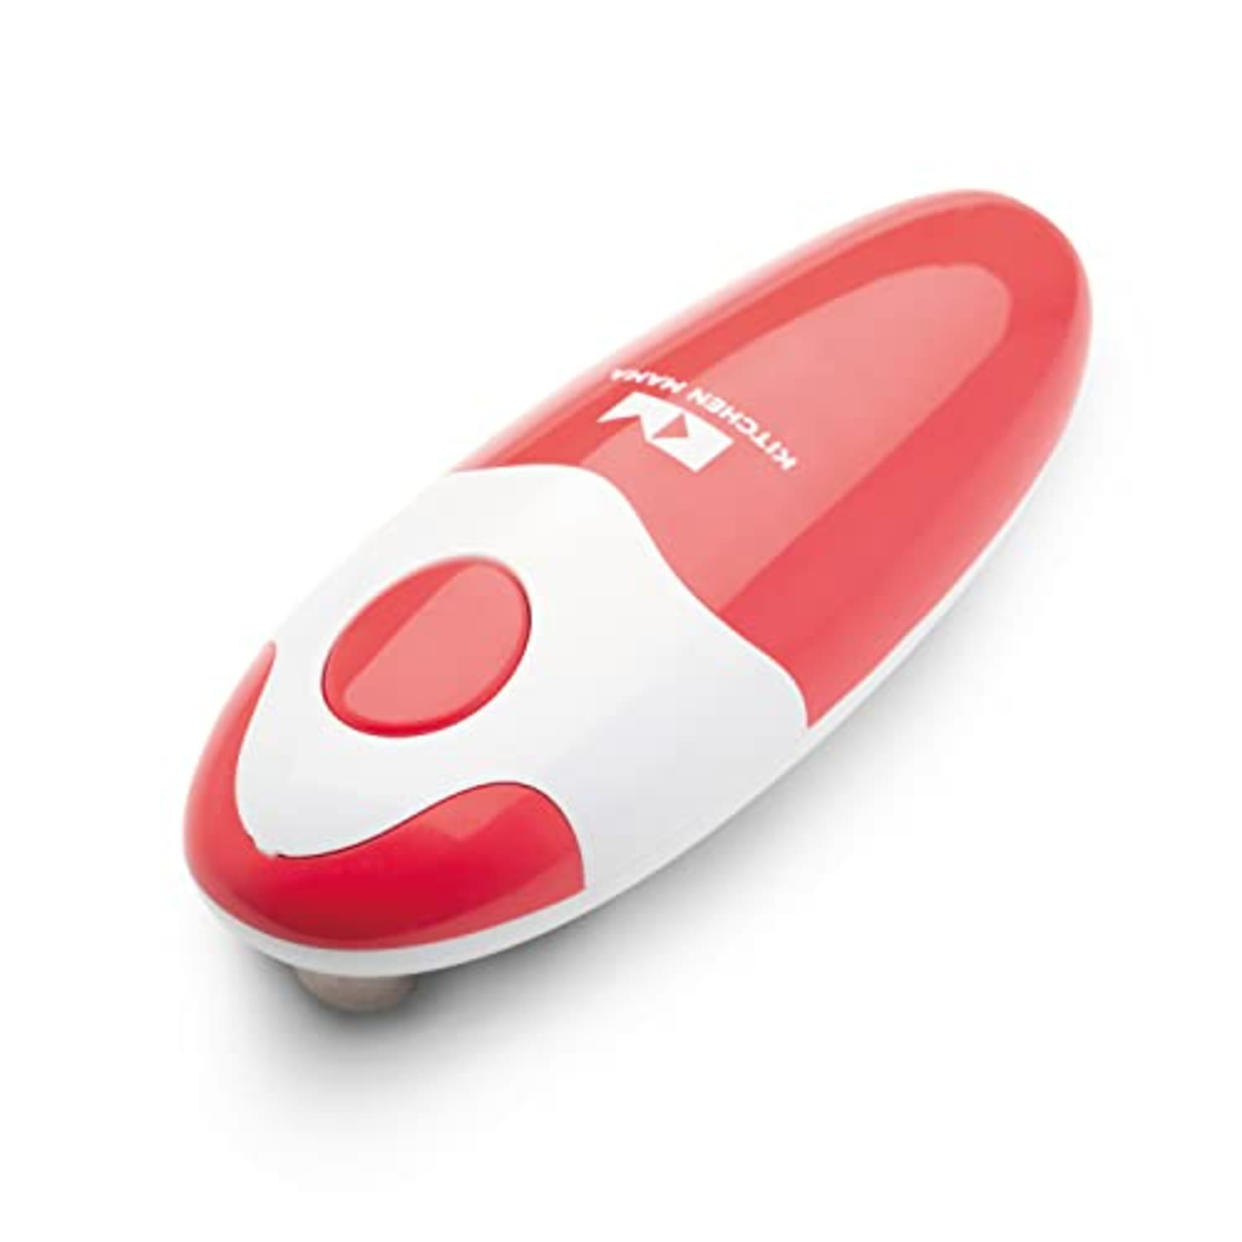 Kitchen Mama Auto Electric Can Opener: Open Your Cans with A Simple Push of Button - Automatic, Hands Free, Smooth Edge, Food-Safe, Battery Operated, YES YOU CAN (Red) (AMAZON)